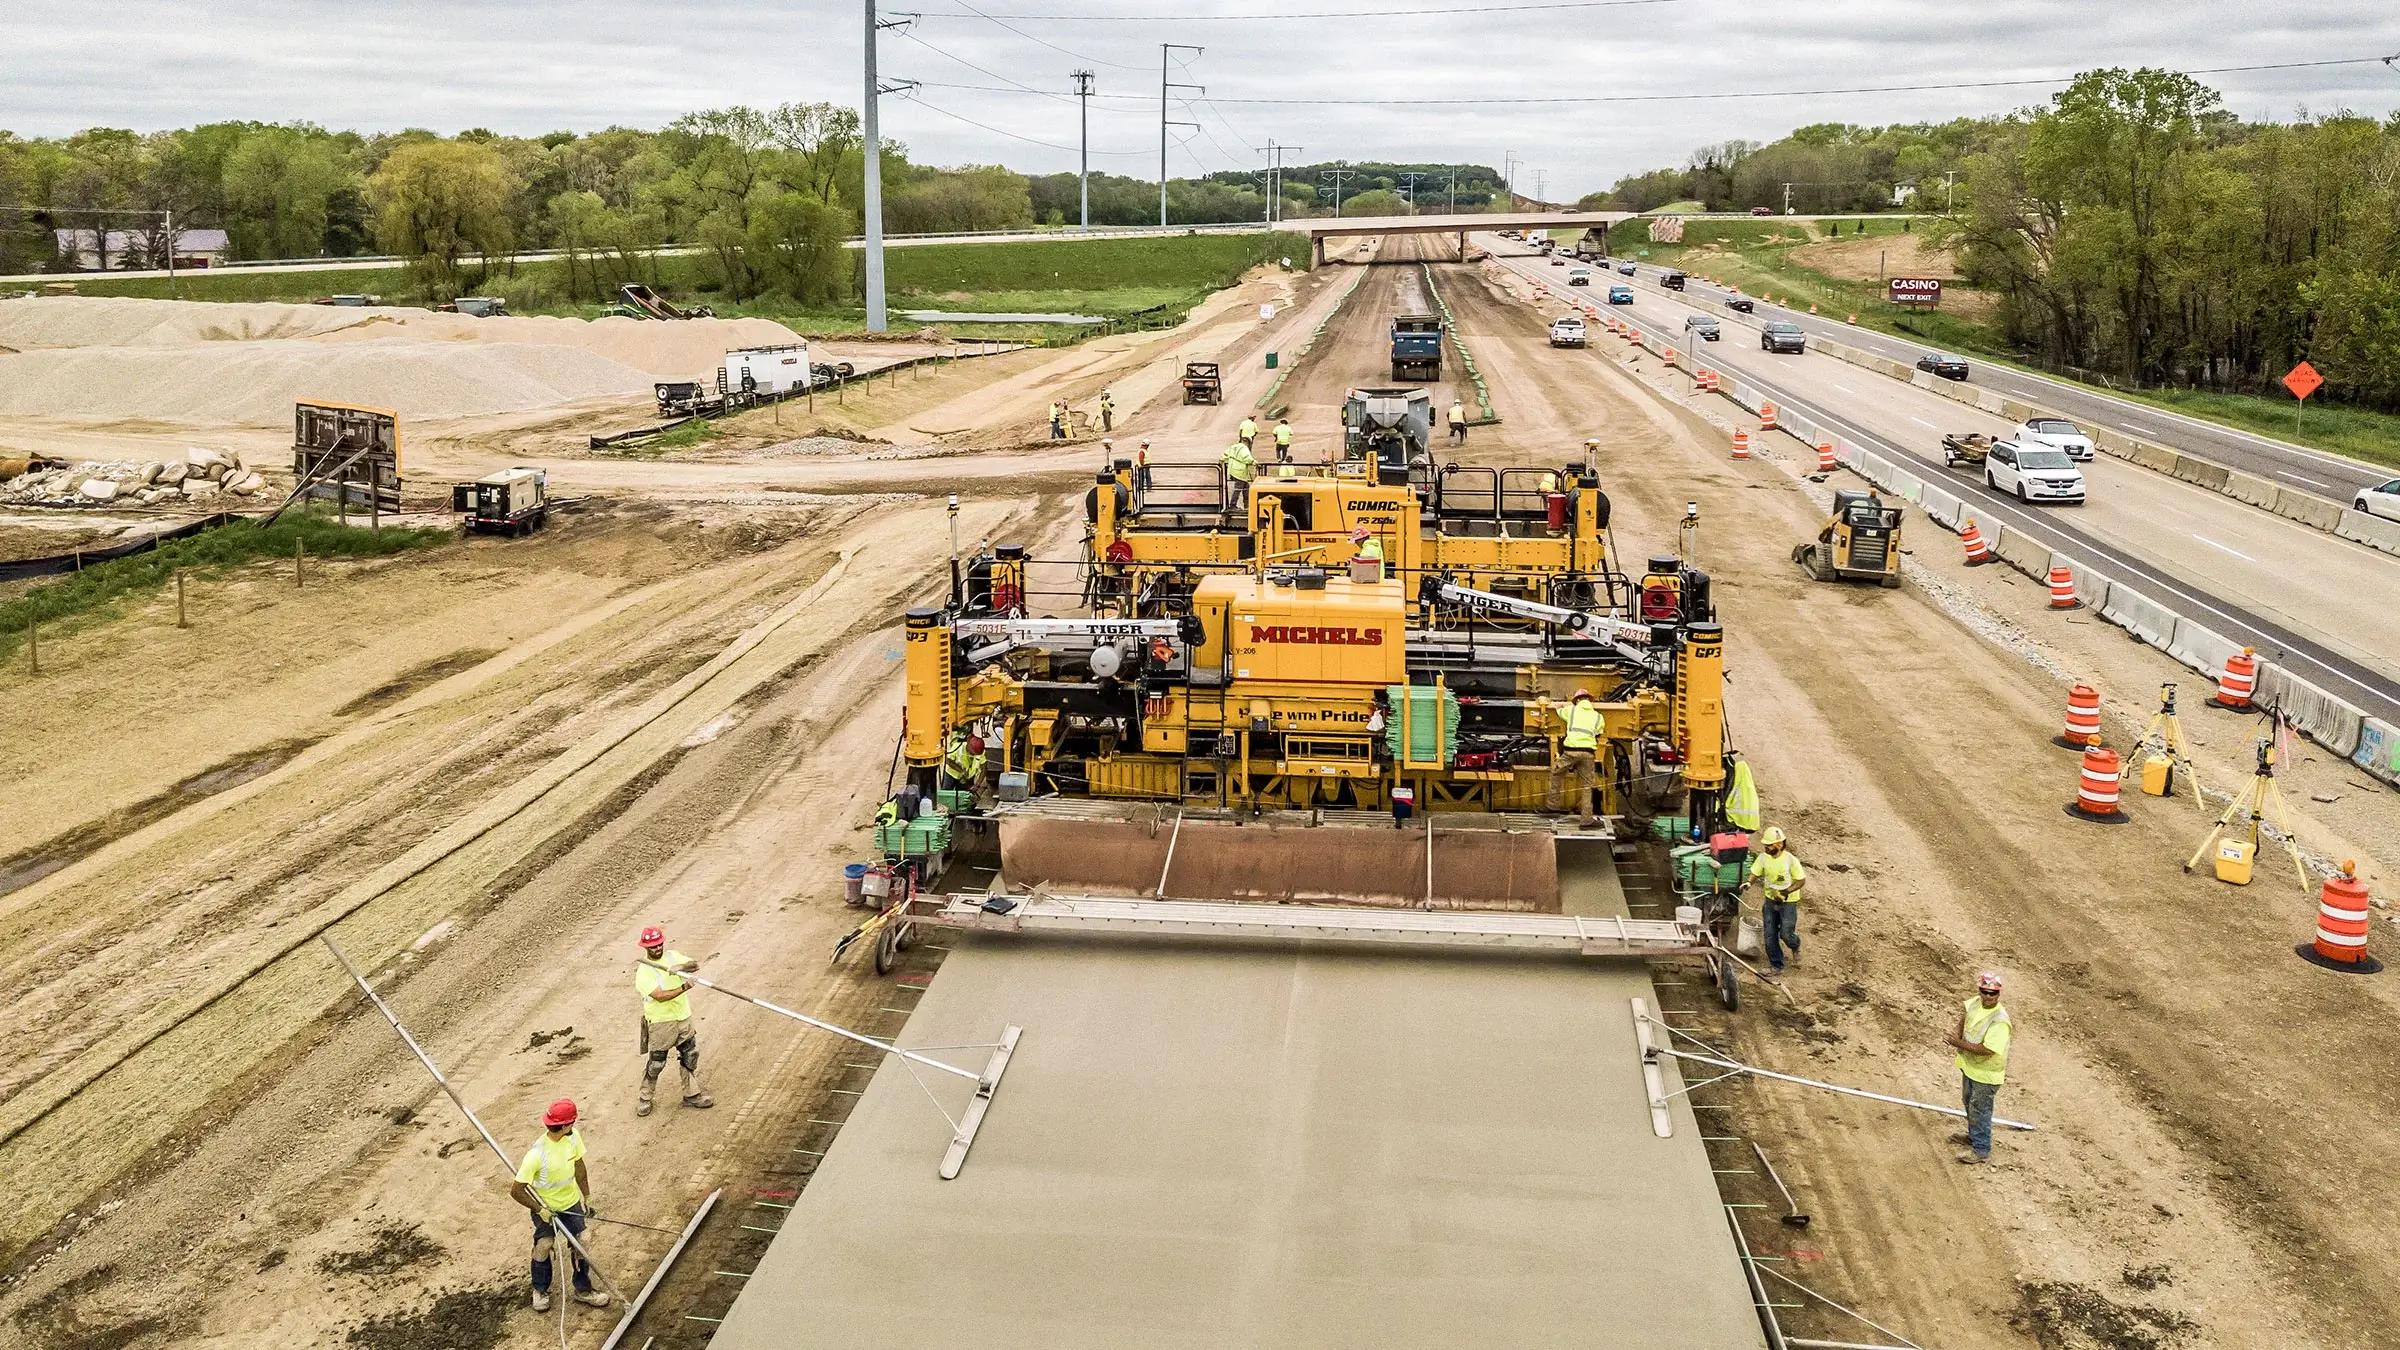 A Michels Road & Stone crew operate a paving machine on Interstate 39